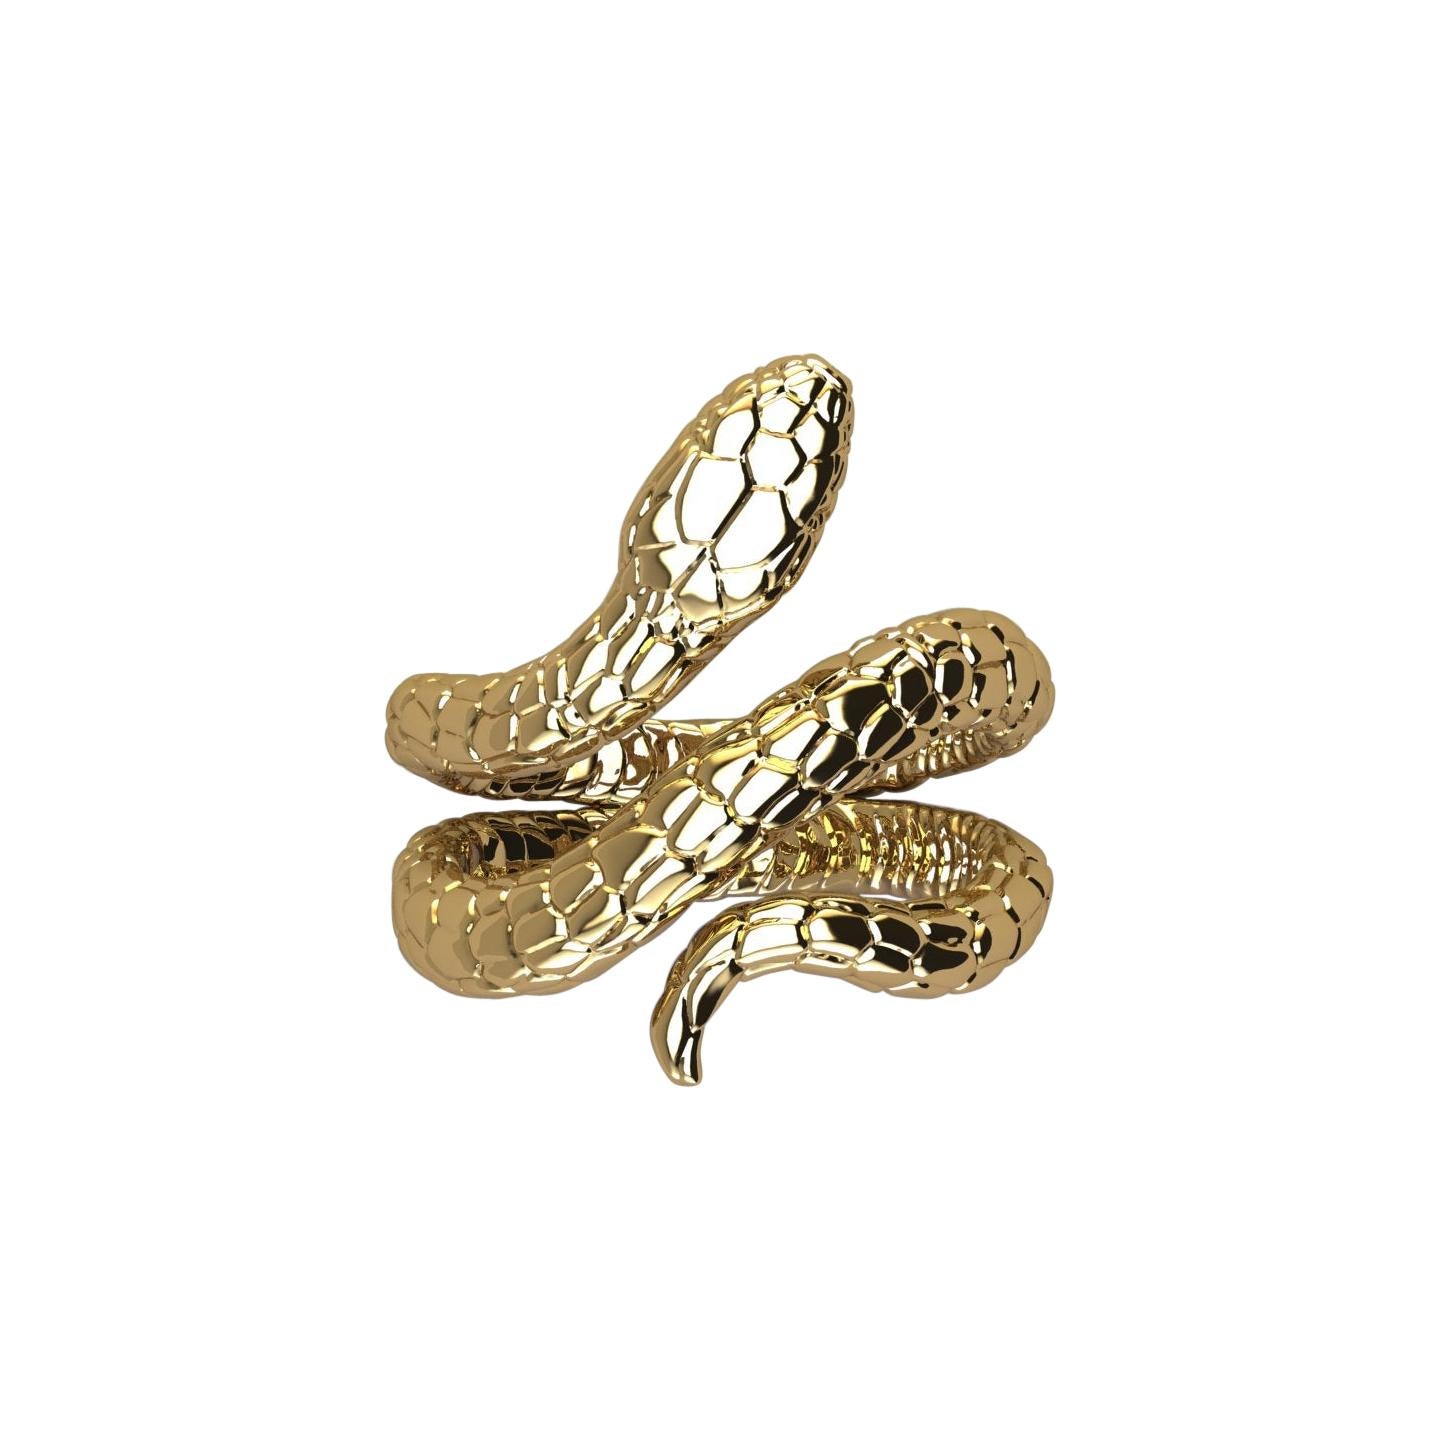 Solid 18k Yellow Gold ring, with very refined details of the skin that makes it very sophisticated, 
no platings, it's made in solid 18k yellow gold, with its characteristic rich yellow color.
A Statement piece, Solid piece of gold ideal for those